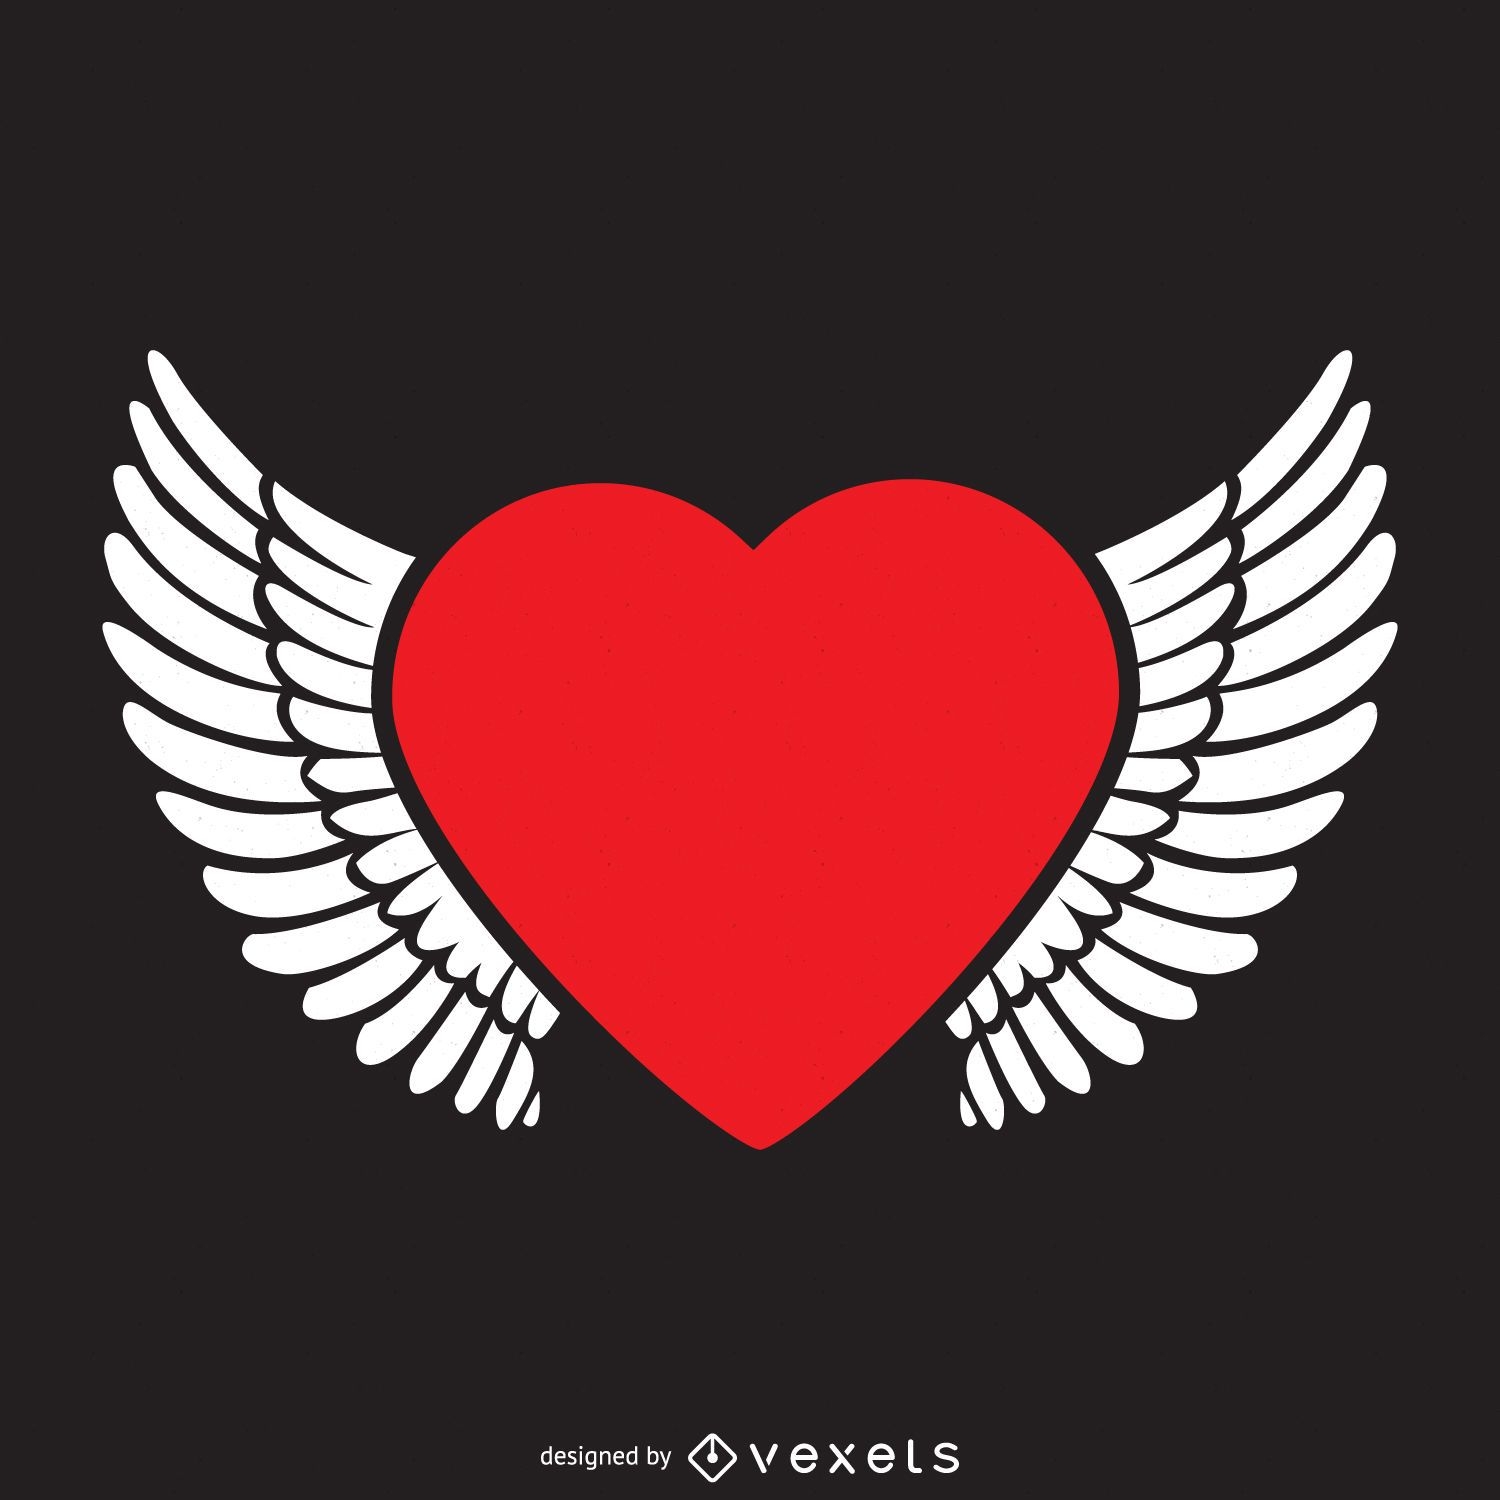 Heart with wings logo template - Vector download